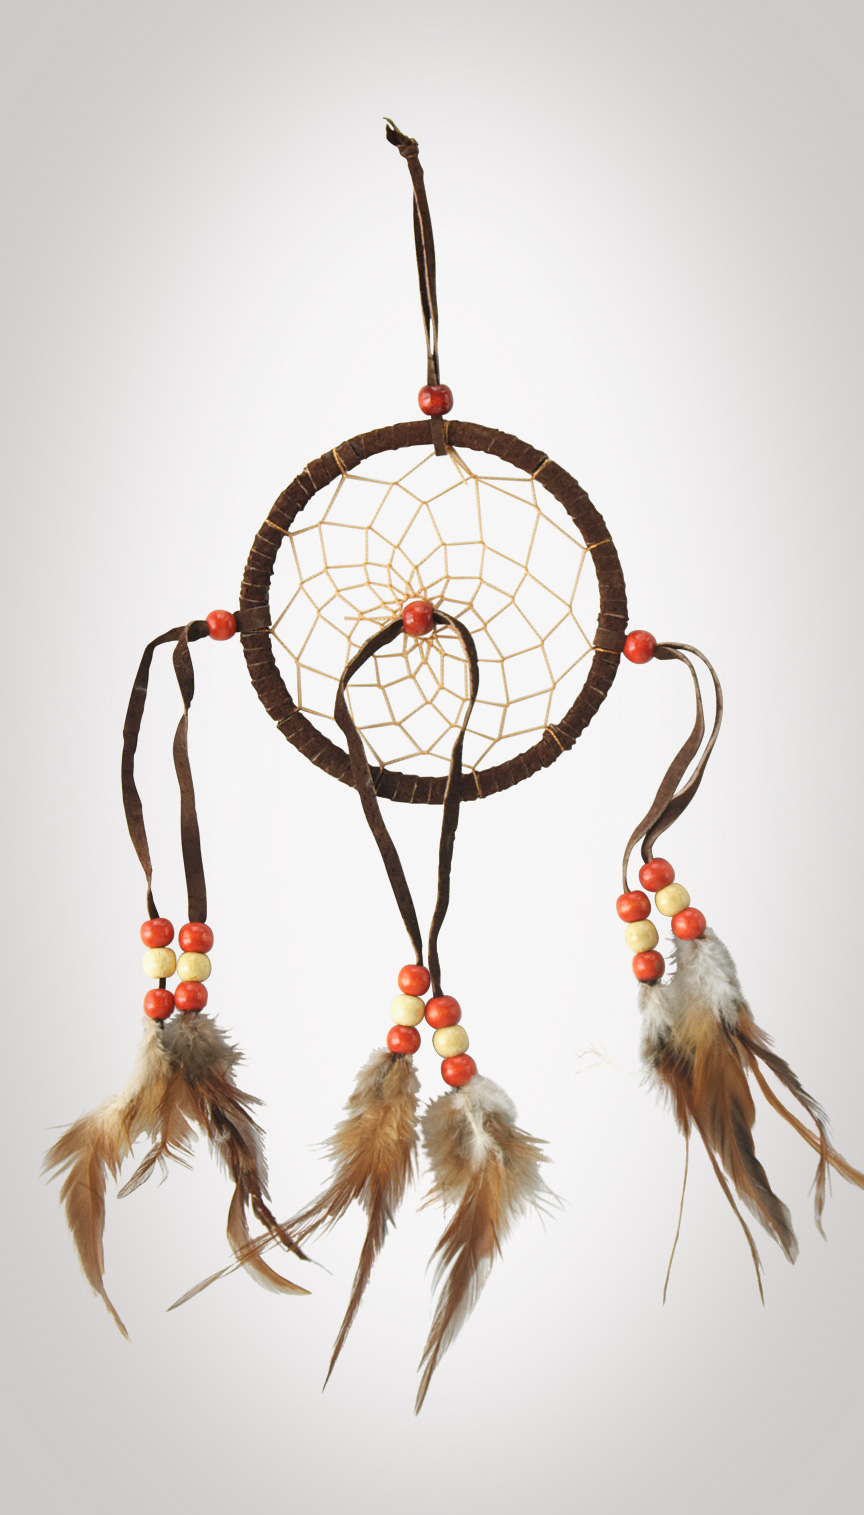 Shows an image of our dreamcatcher owg005